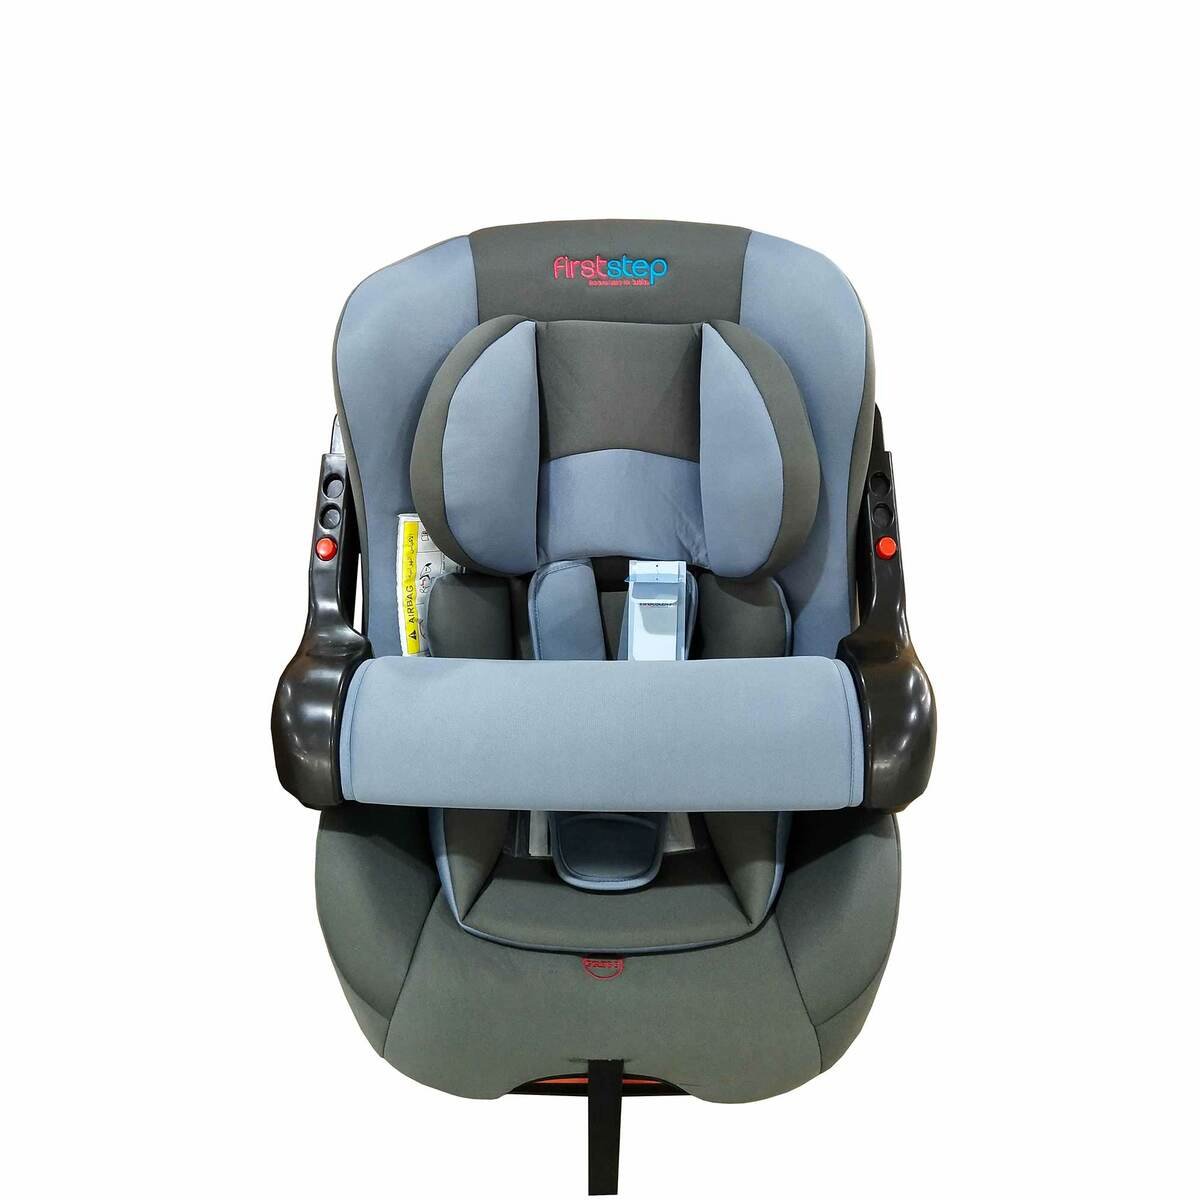 First Step Baby Car Seat HB-901 Gray